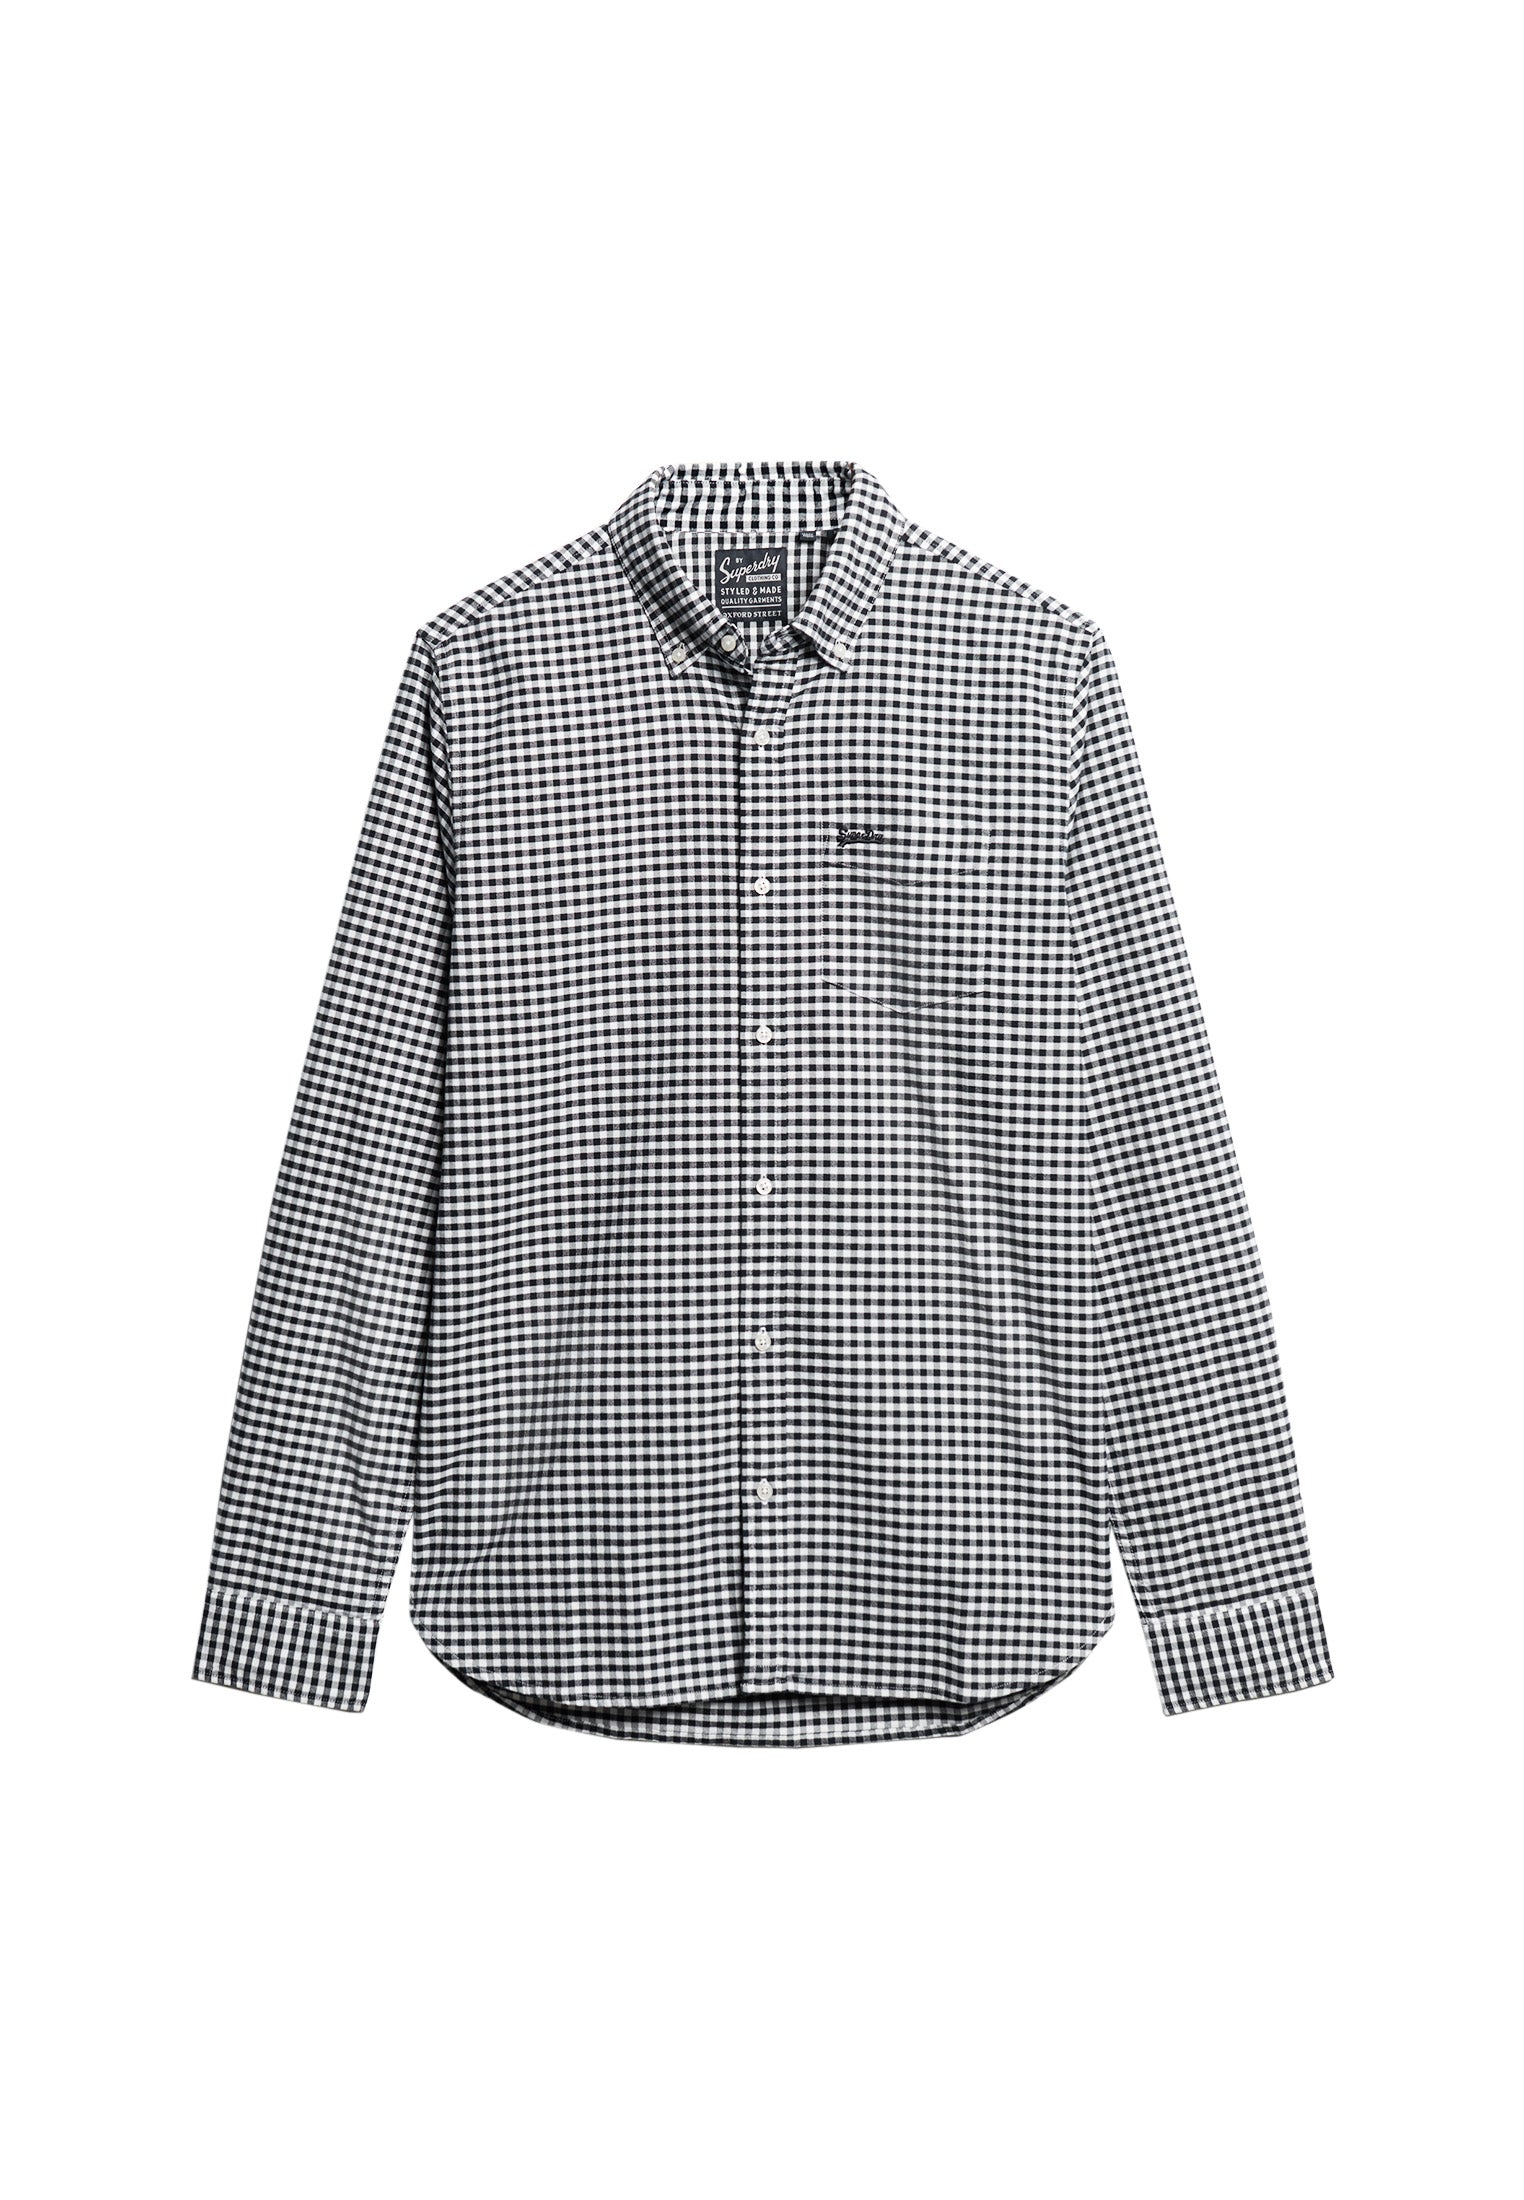 Cotton Long Sleeve Oxford Eclipse Navy Gingham Shirt